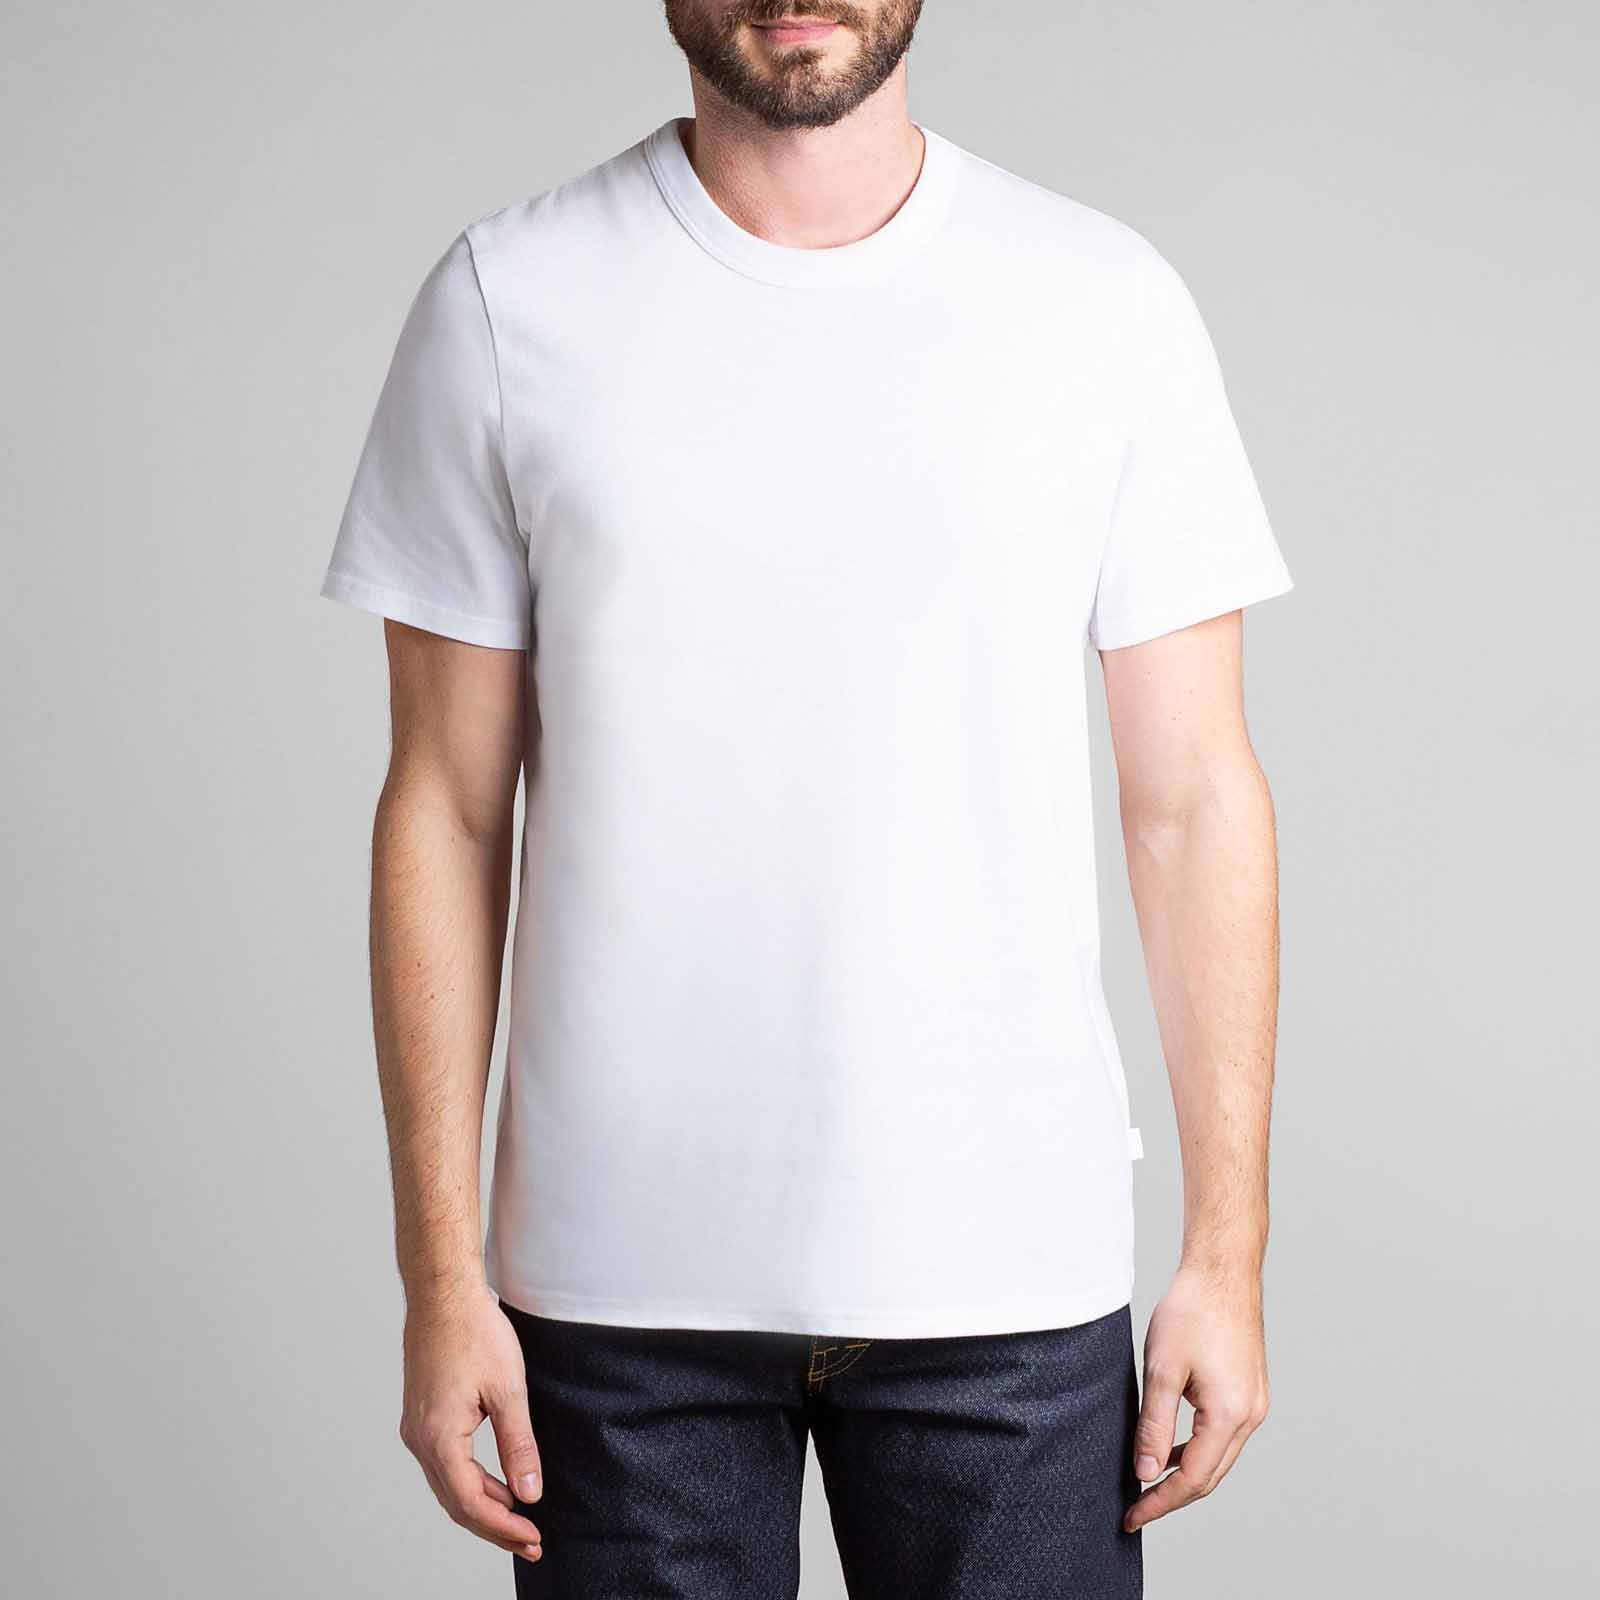 Tshirt homme col rond VIEUX MACHIN by French Disorder.